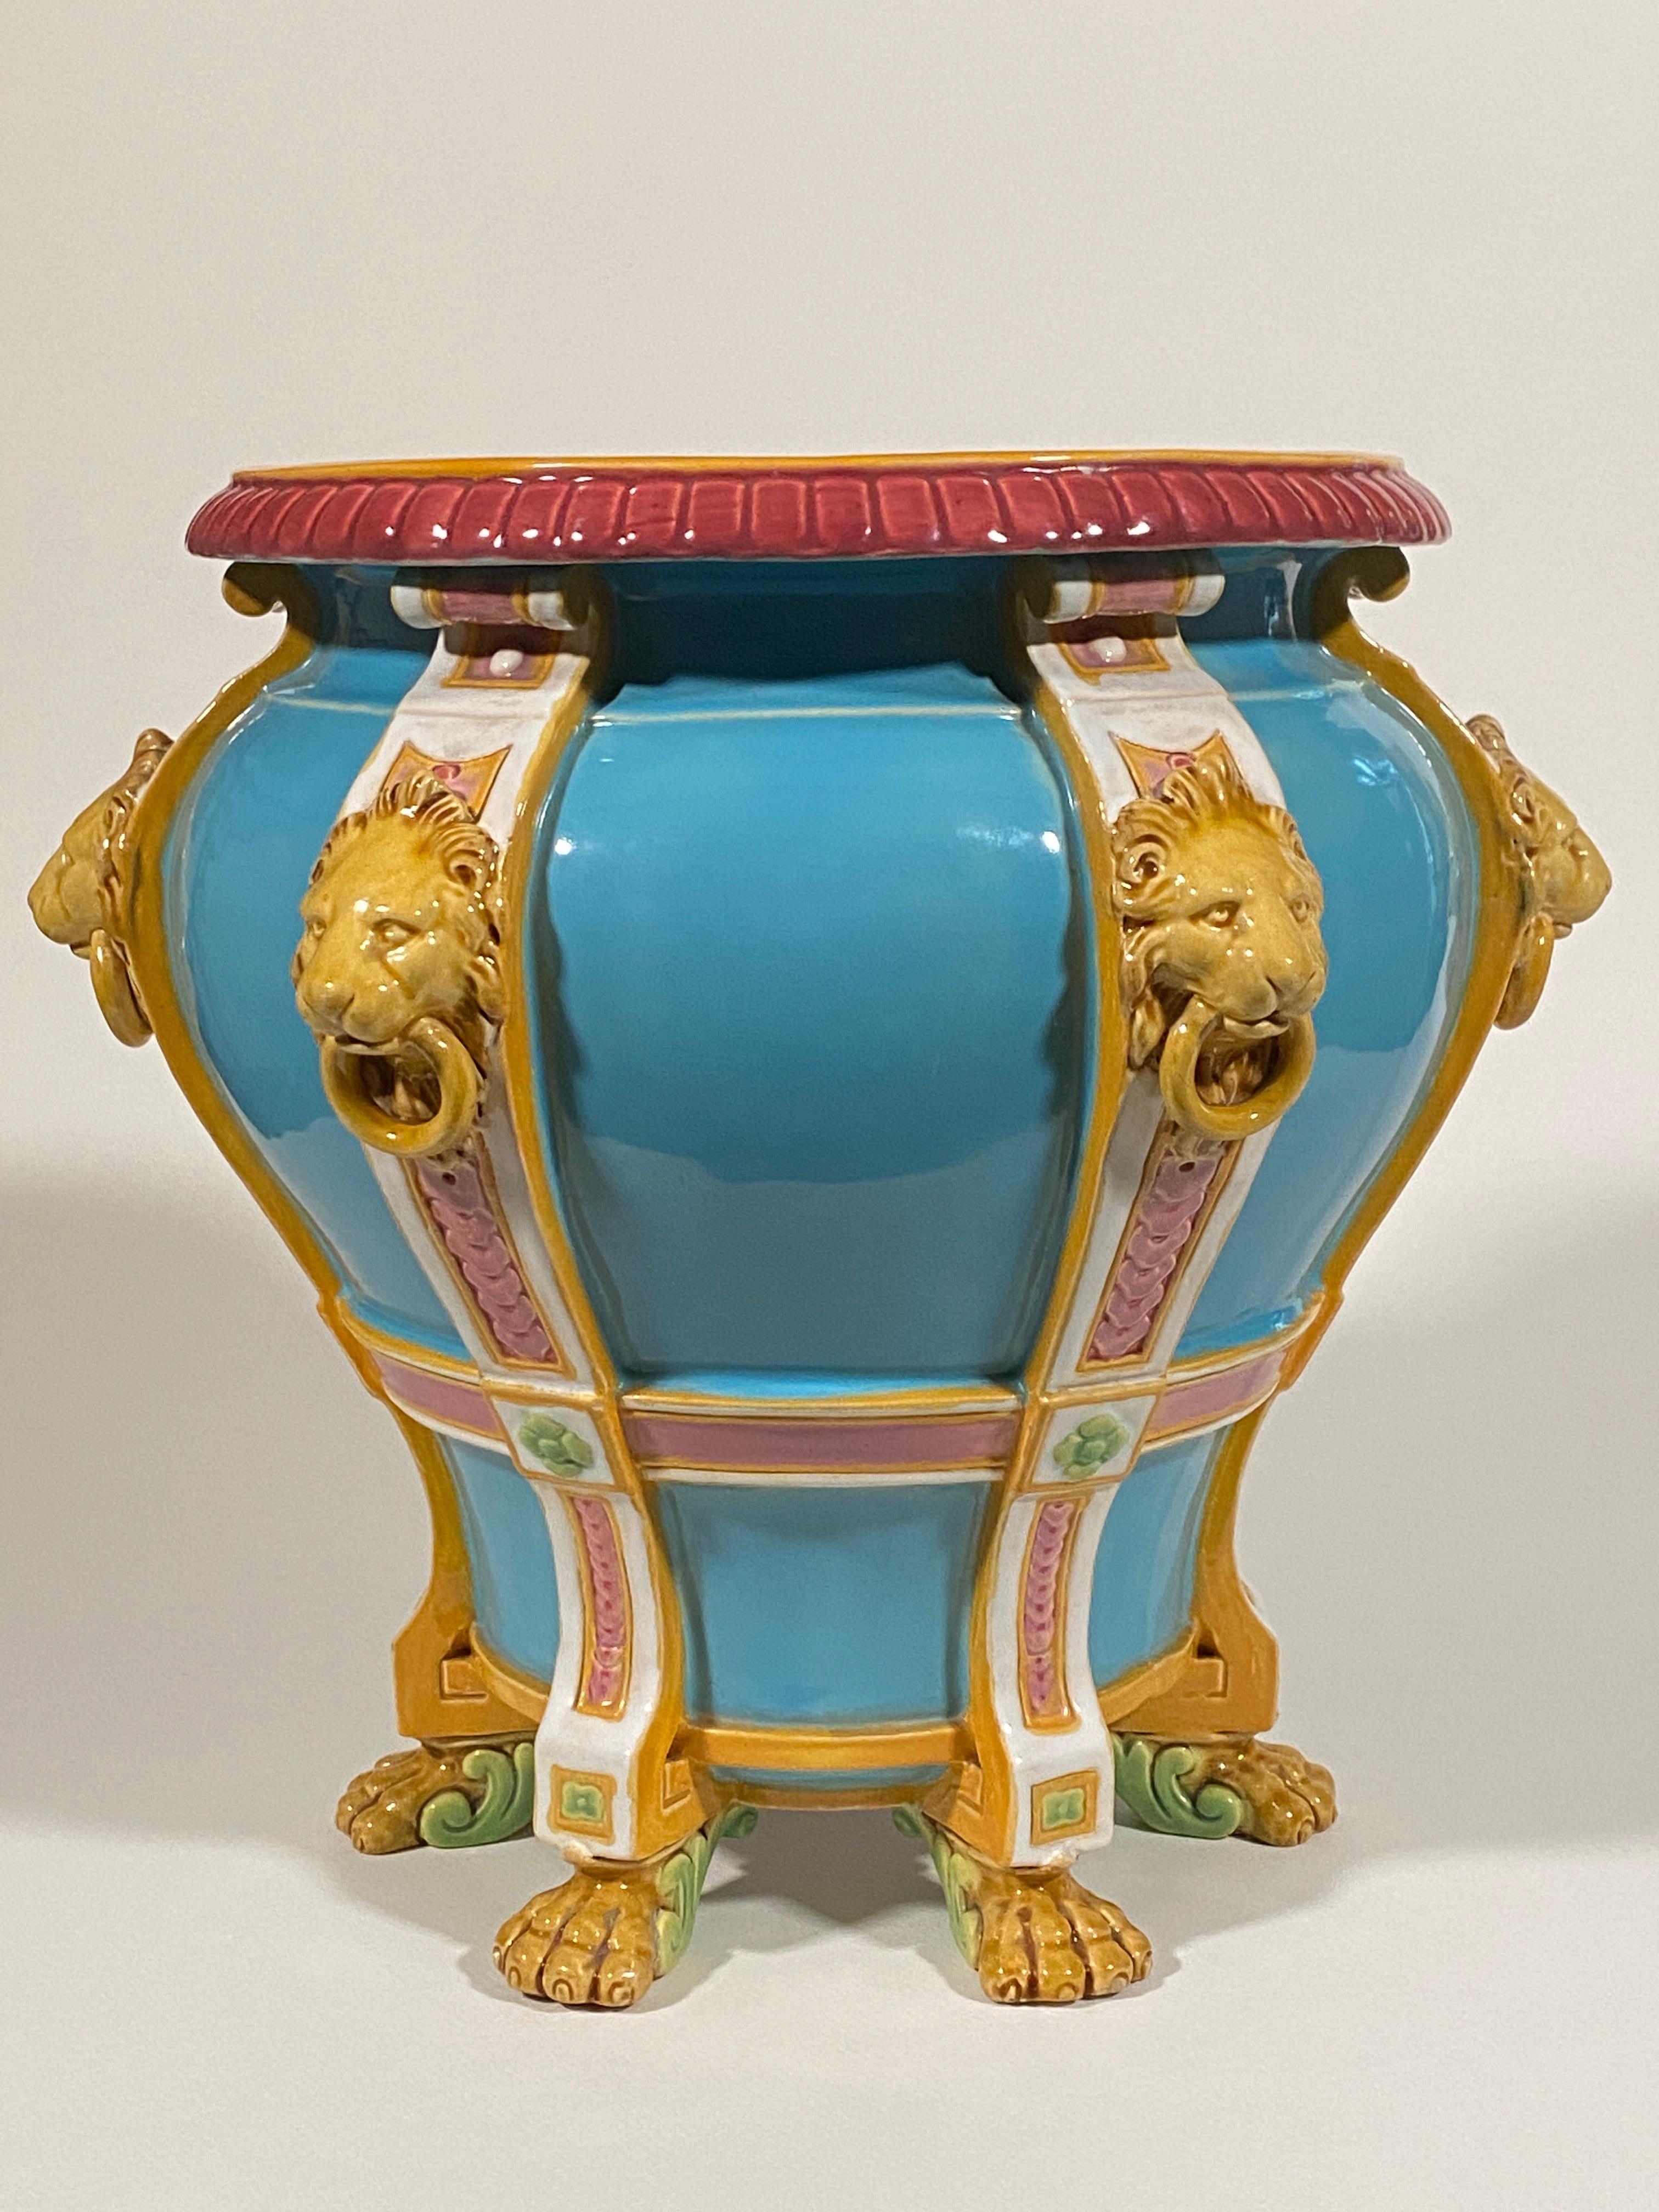 Ceramic jardiniere/planter by British pottery company Minton (Thomas Minton and Sons or Mintons Limited). Minton is a famous ceramicist of the English 19th century Victorian period.

The jardiniere is notable for it's six mold lions' heads and paw